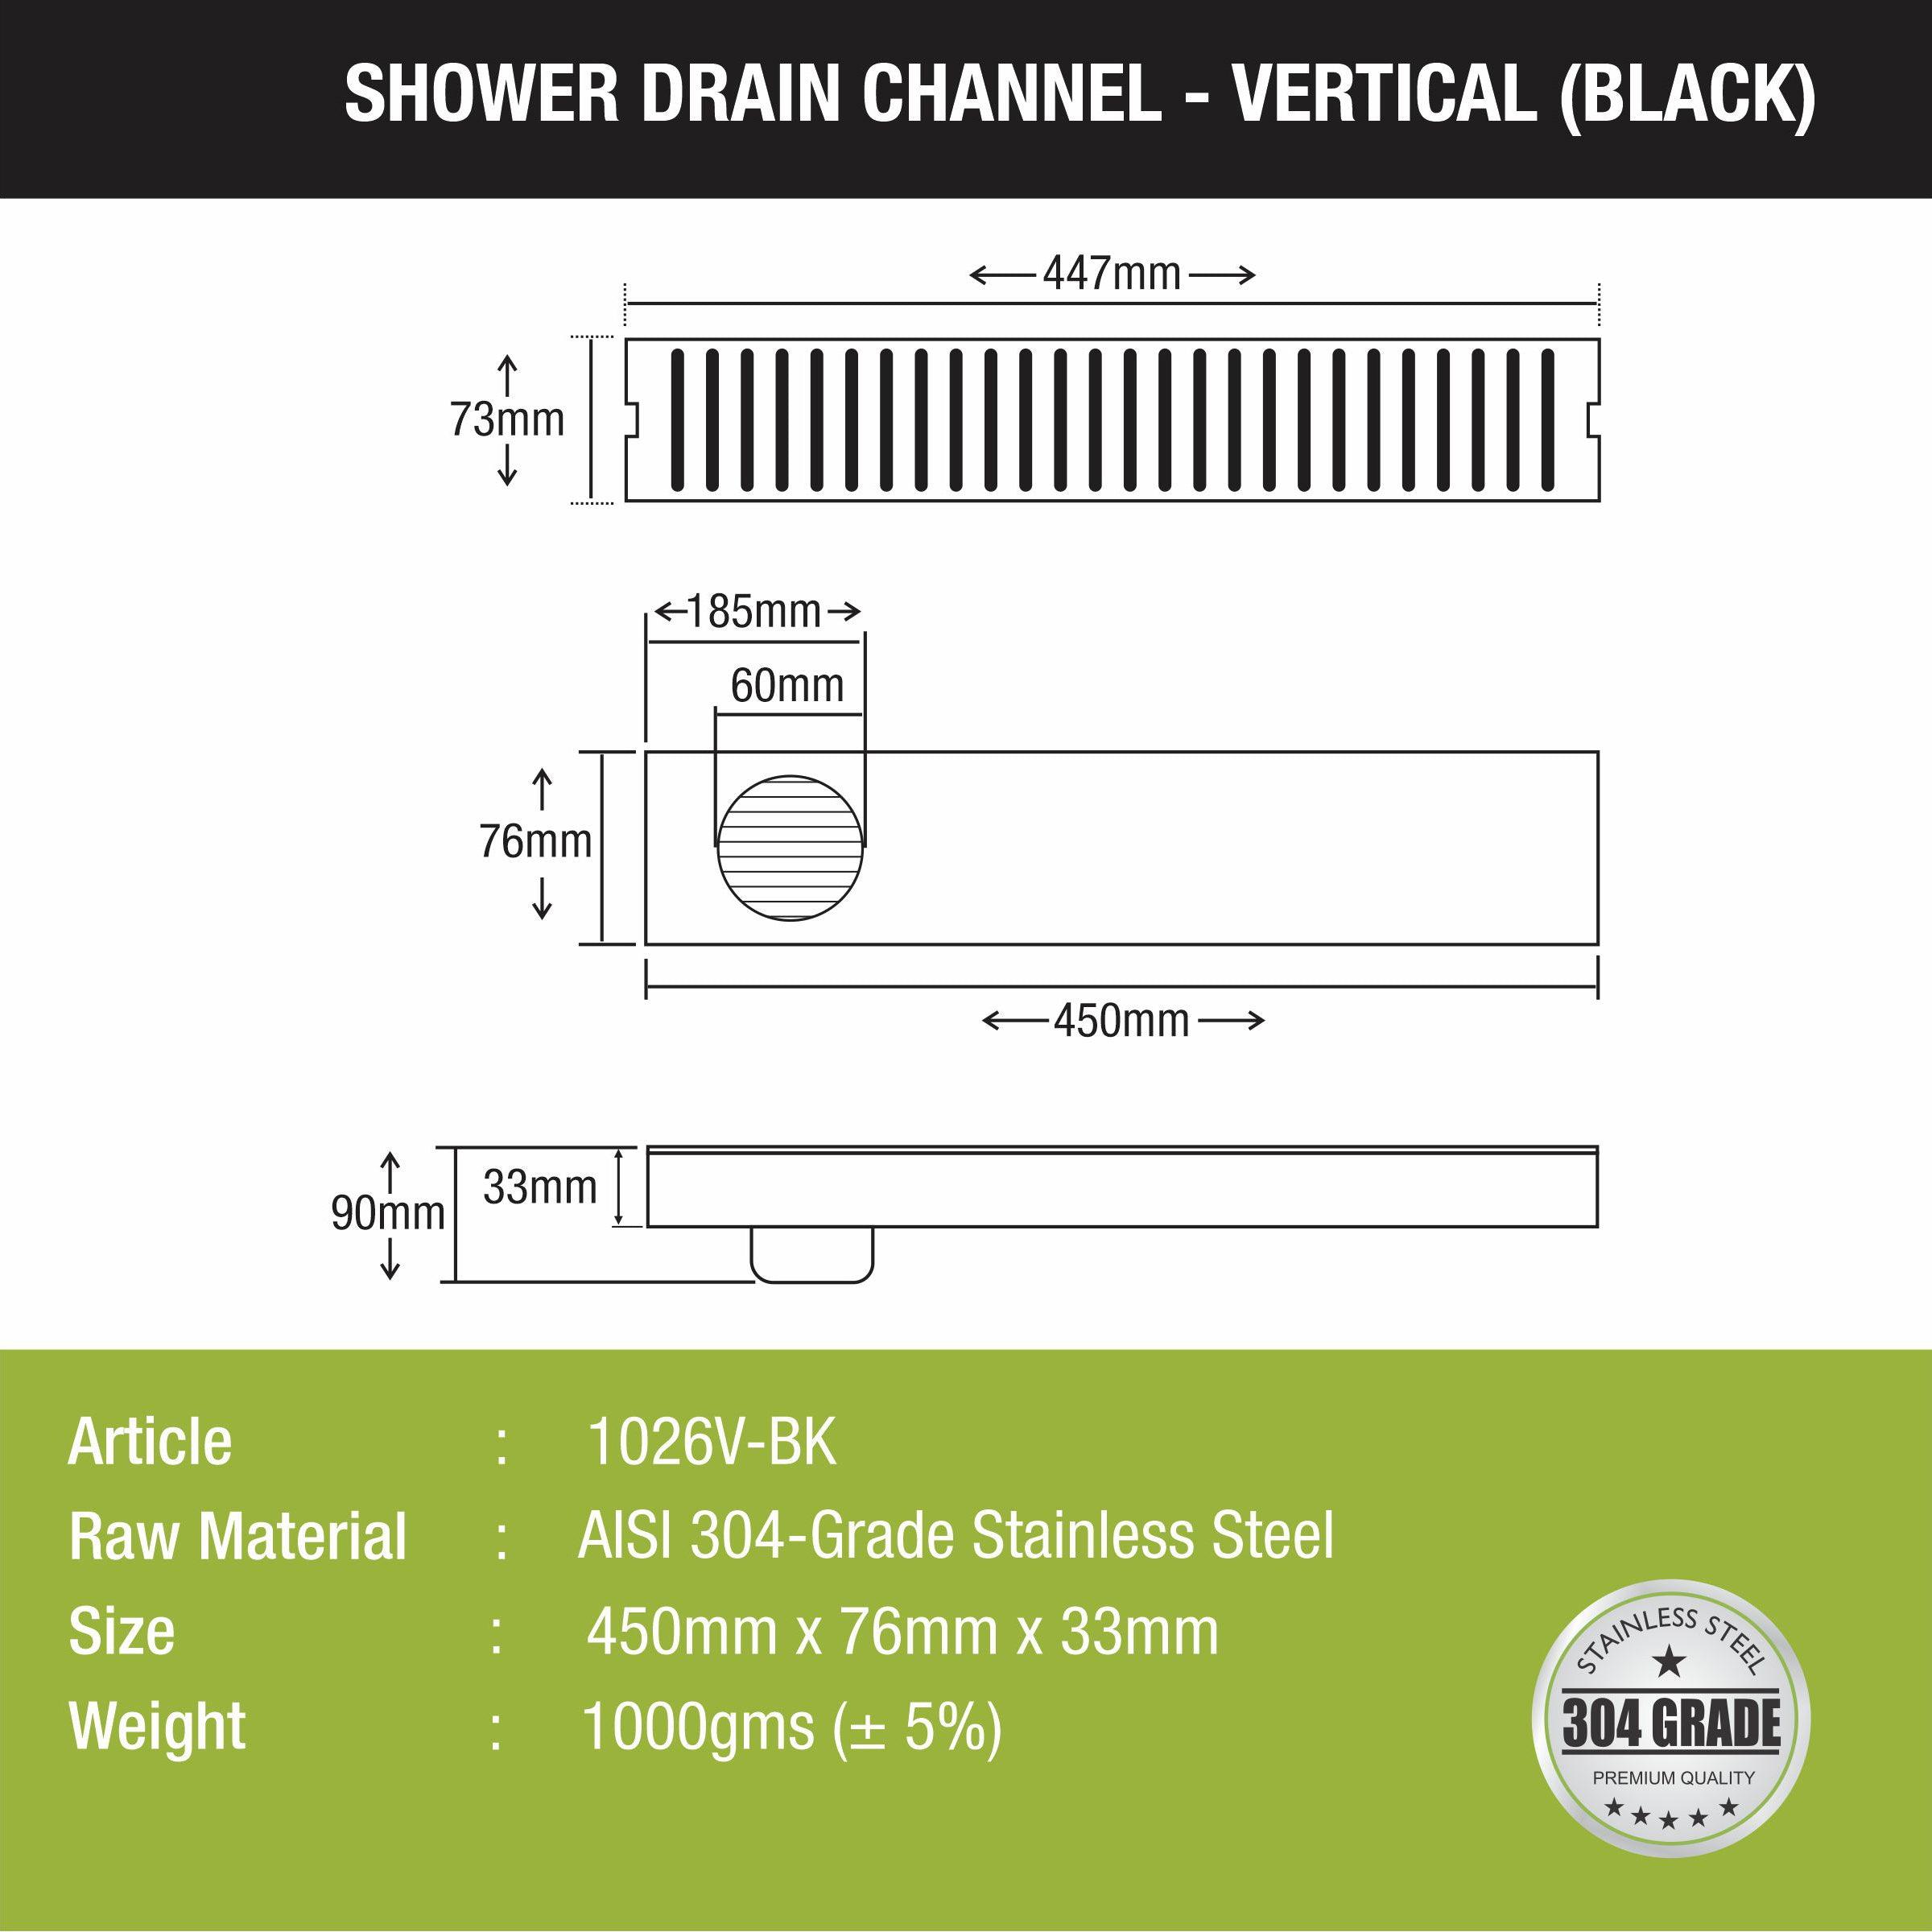 Vertical Shower Drain Channel - Black (18 x 3 Inches)  size and measurement